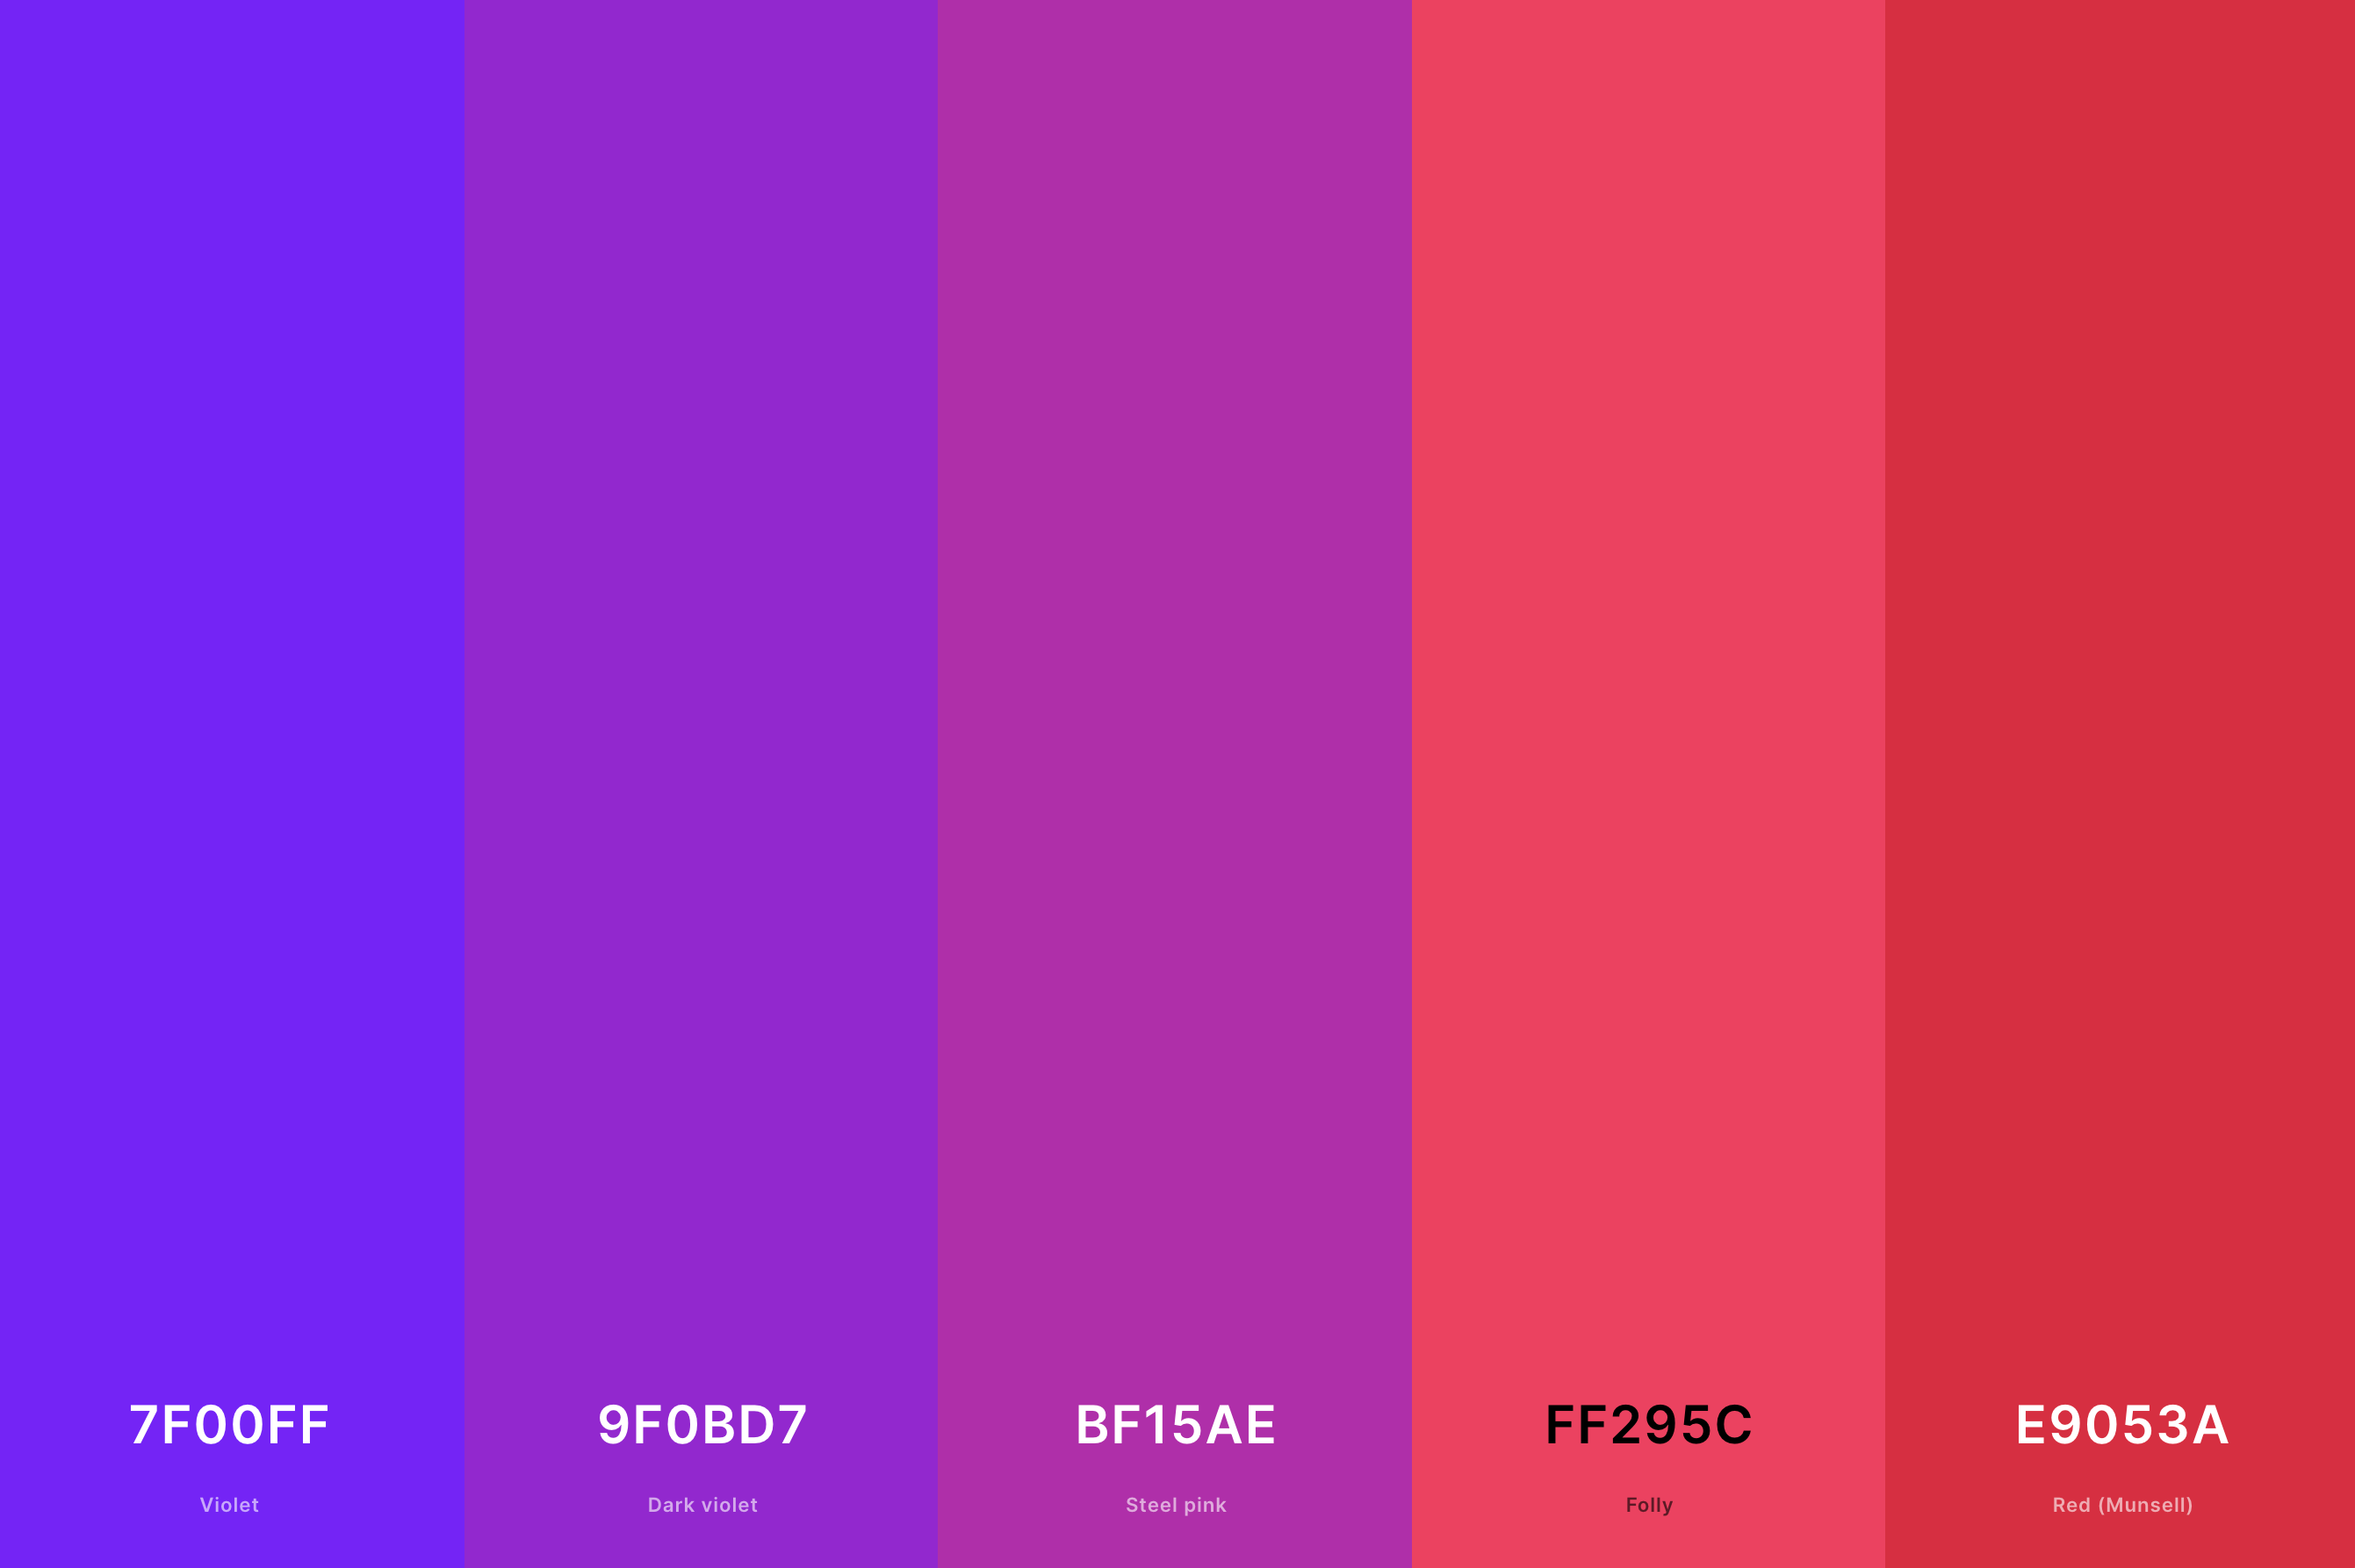 4. Red Violet Color Palette Color Palette with Violet (Hex #7F00FF) + Dark Violet (Hex #9F0BD7) + Steel Pink (Hex #BF15AE) + Folly (Hex #FF295C) + Red (Munsell) (Hex #E9053A) Color Palette with Hex Codes